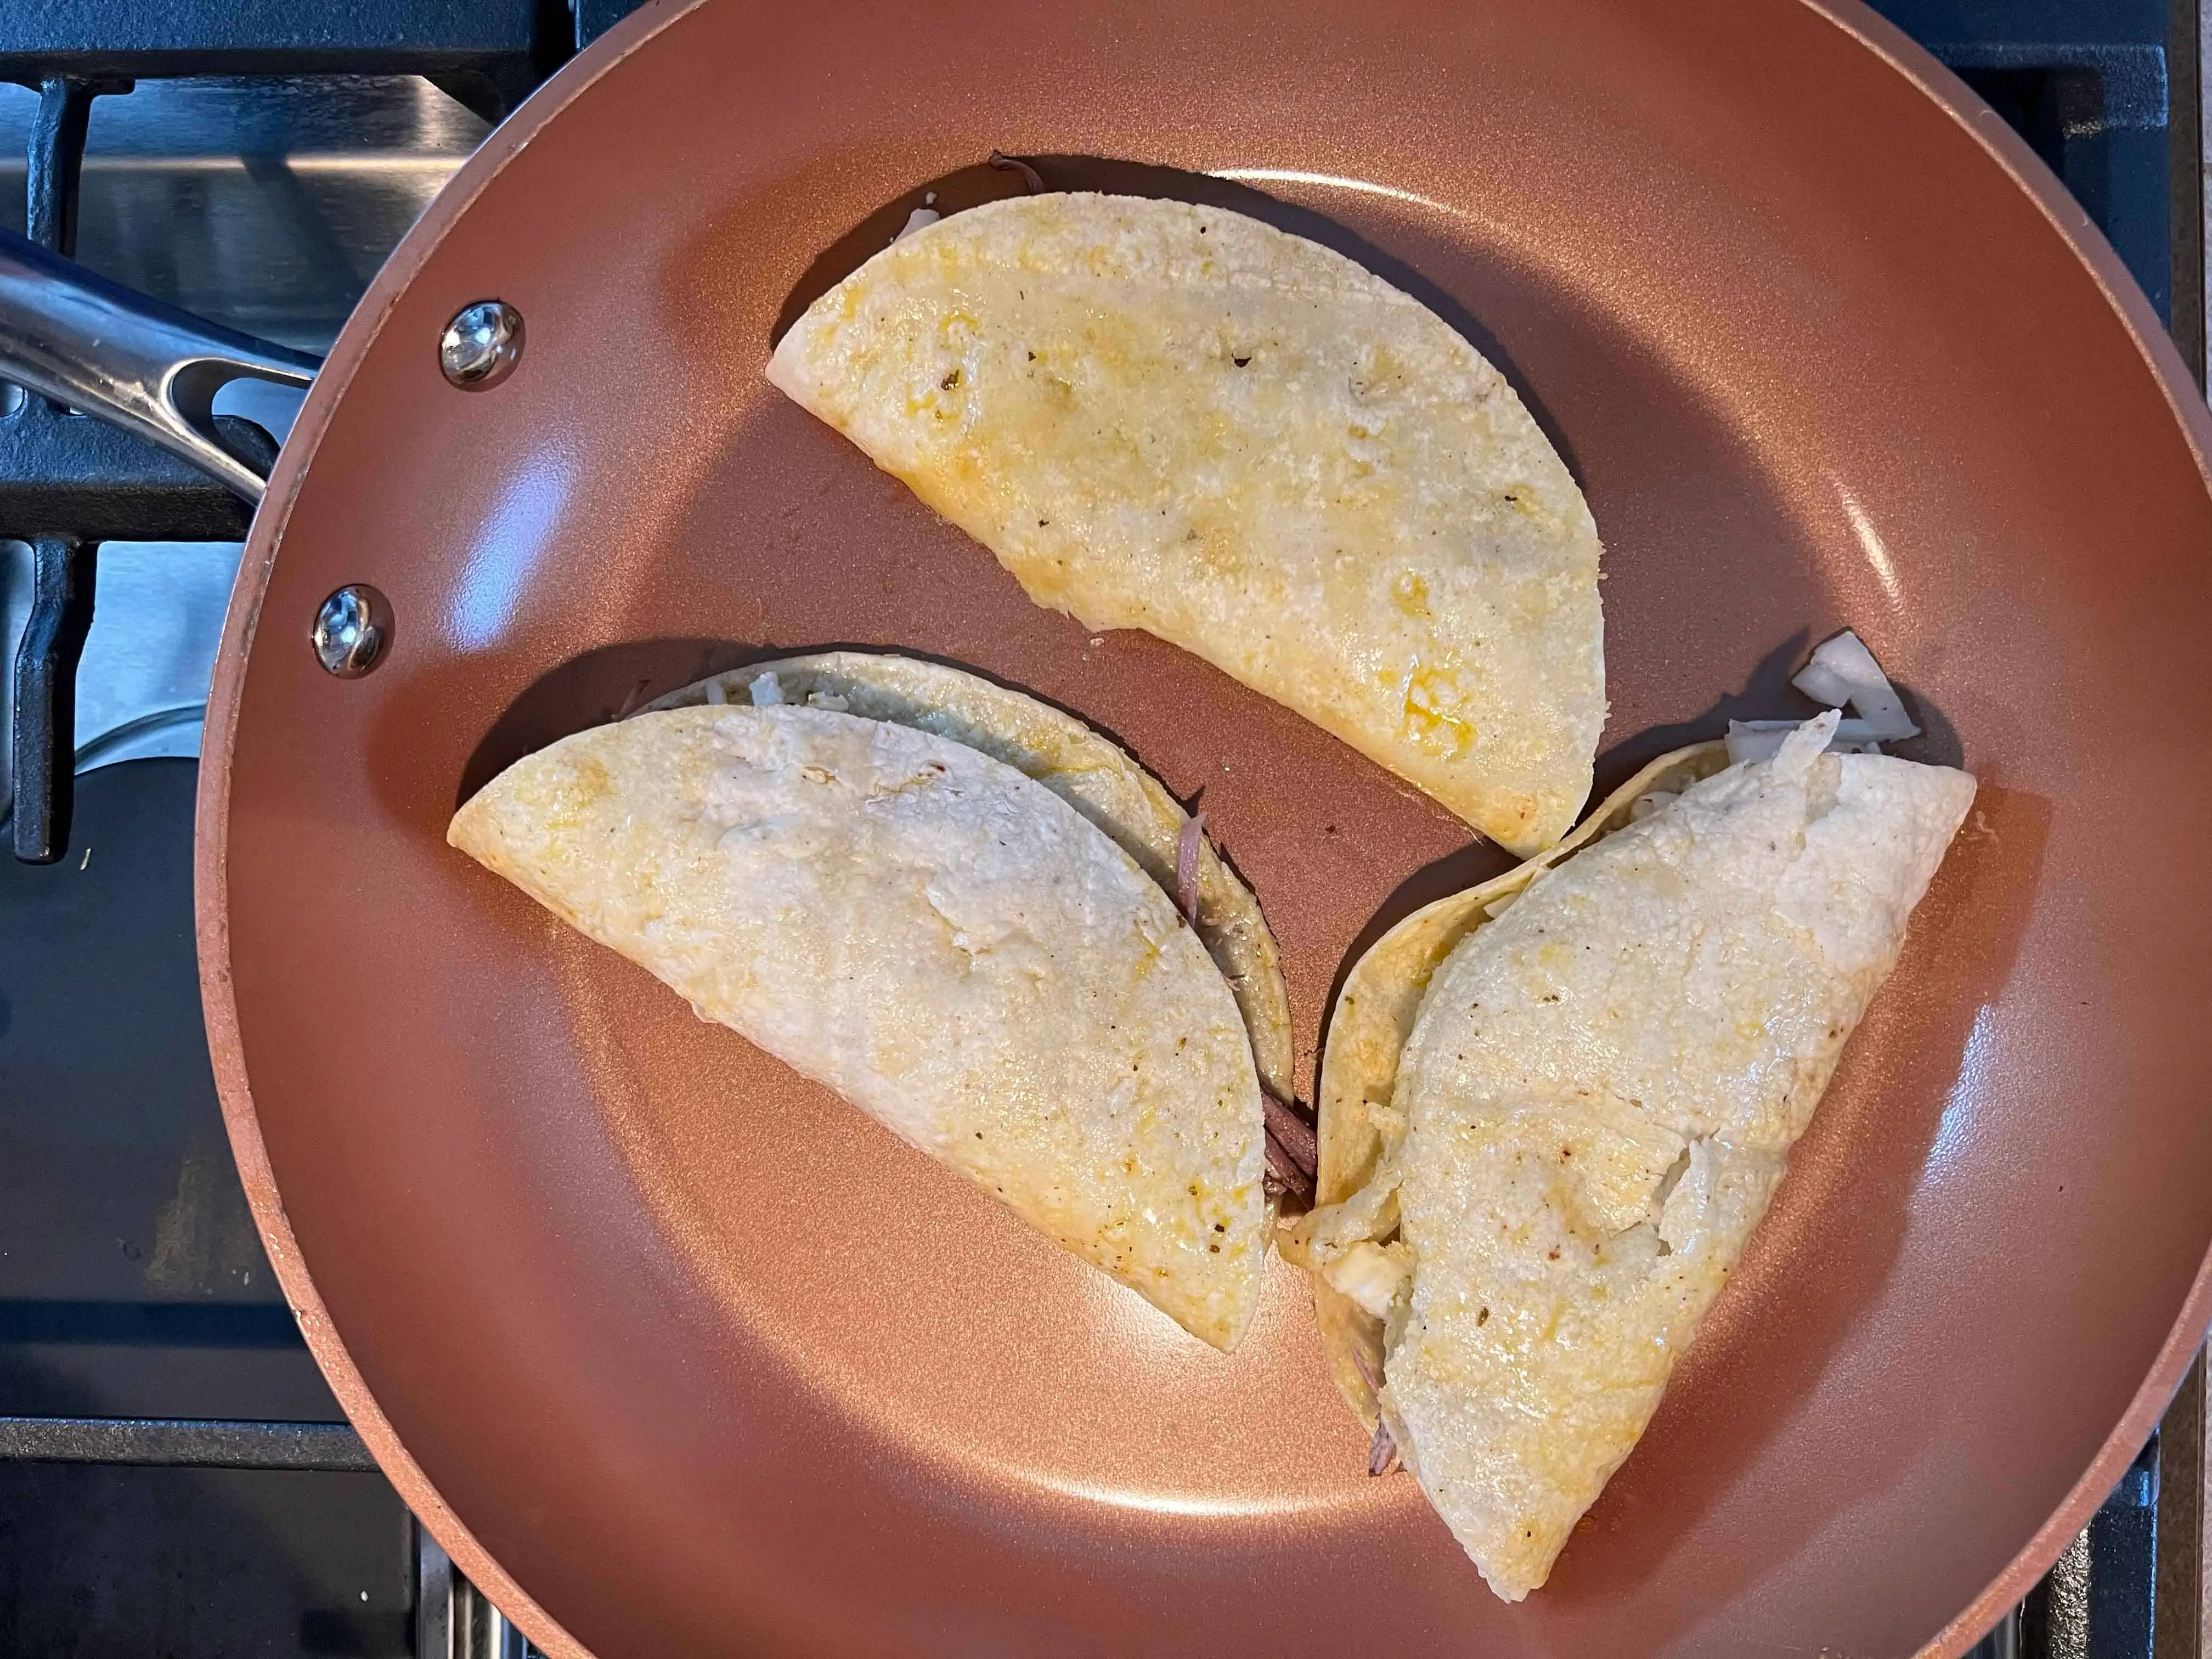 Fry the dipped and filled tortillas until golden brown.